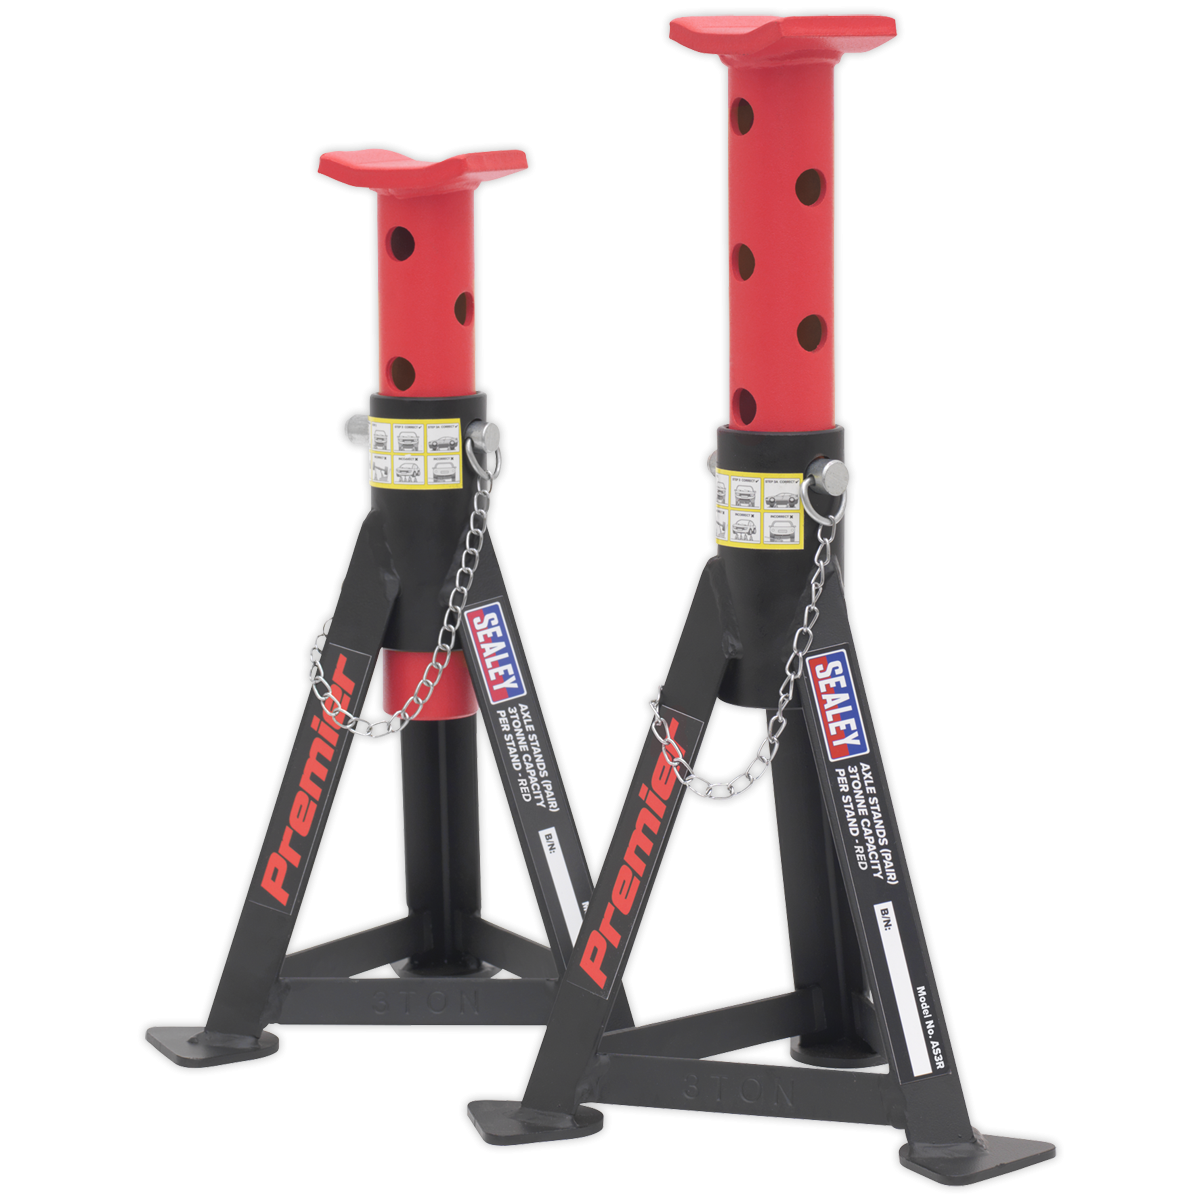 Sealey AS3R Axle Stands (Pair) 3tonne Capacity per Stand - Red